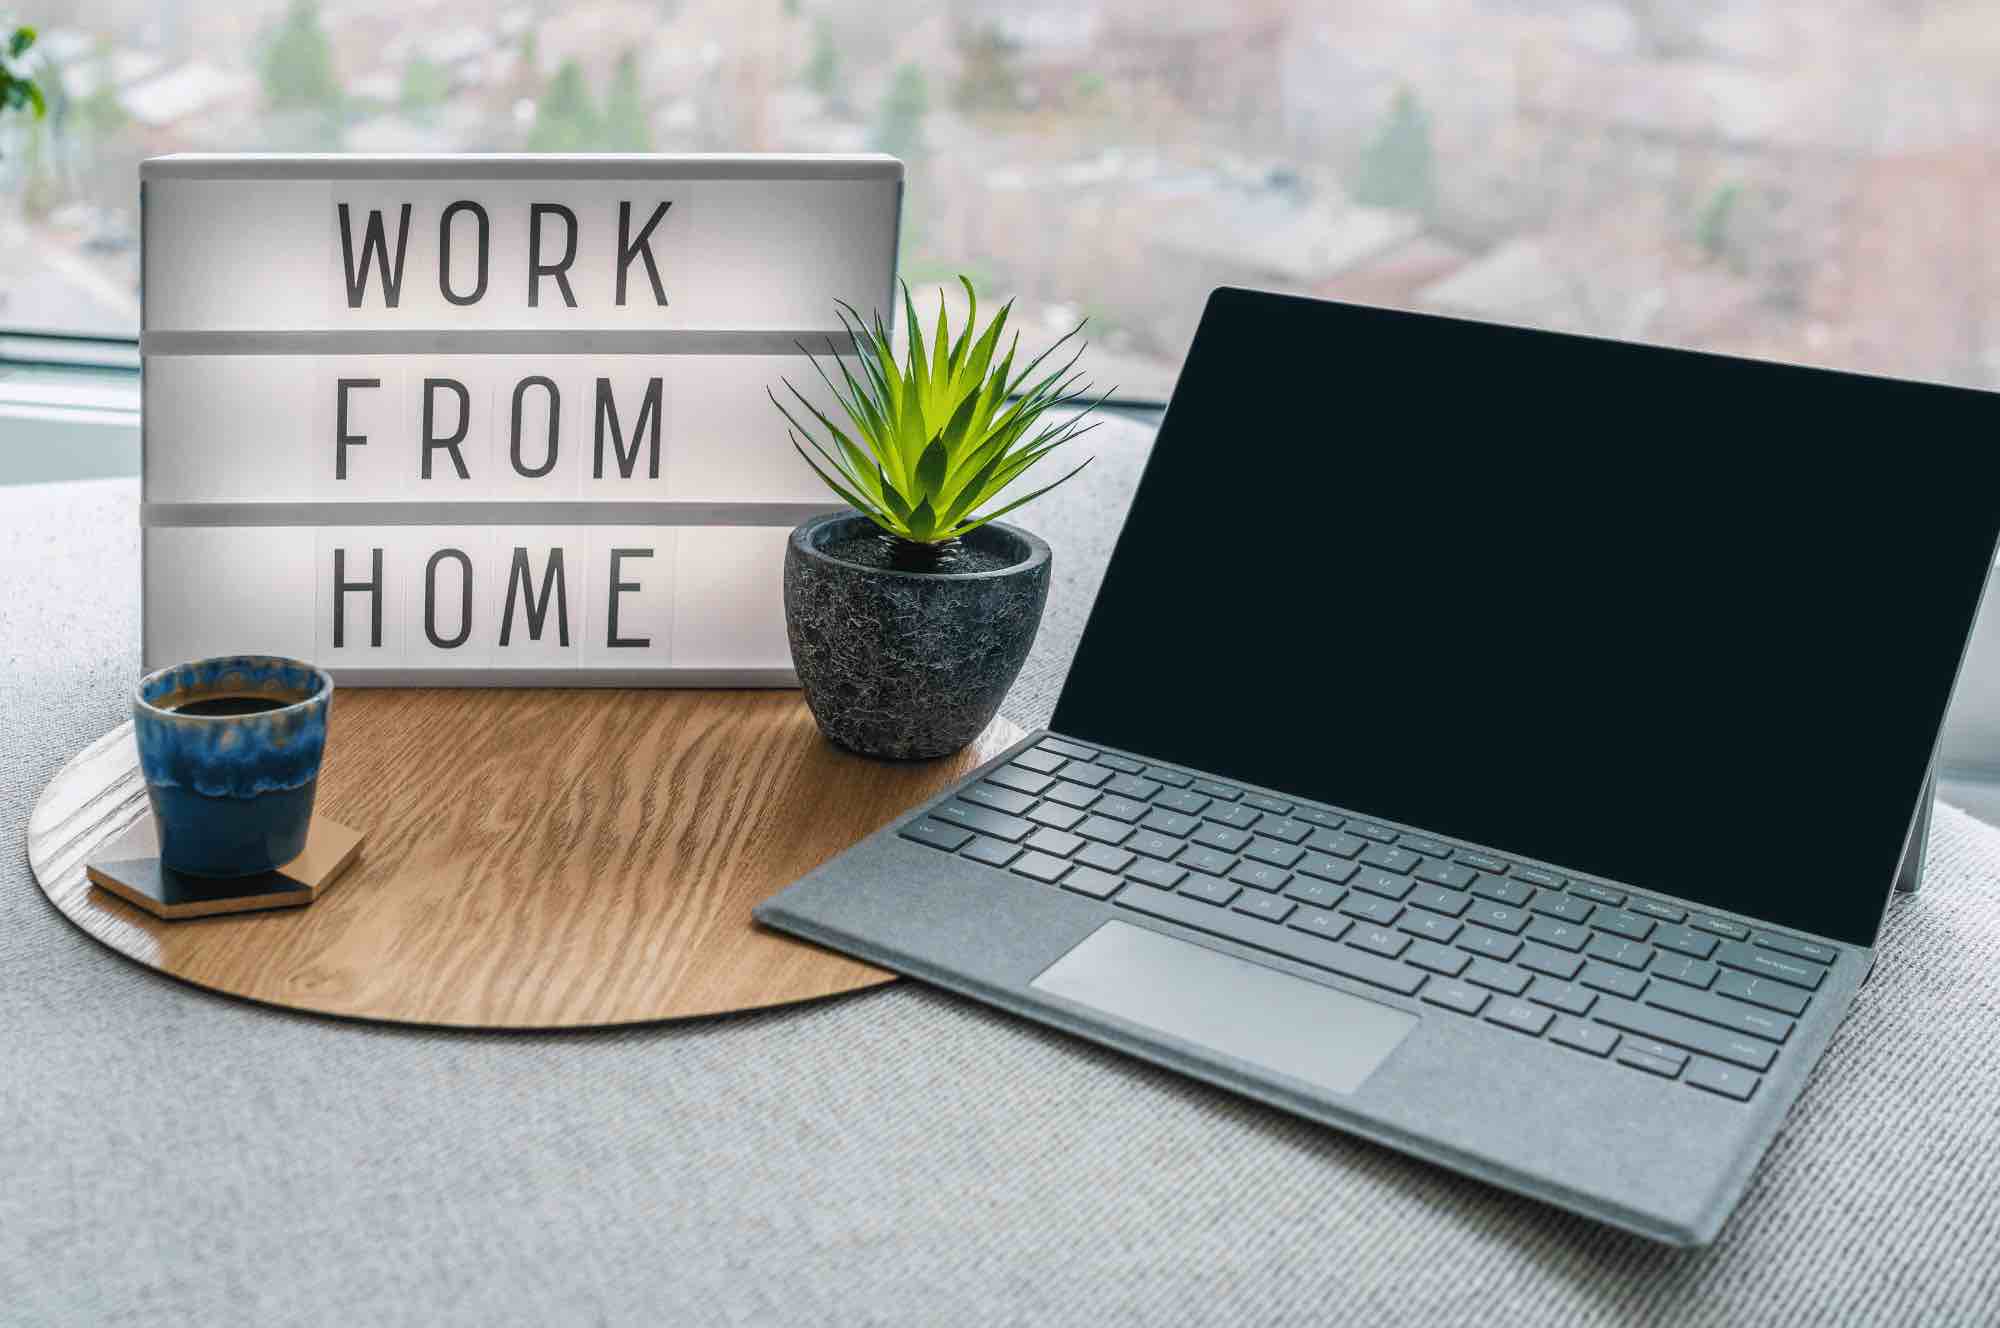 Virtual Wizards team working from home to provide top virtual assistant hiring services